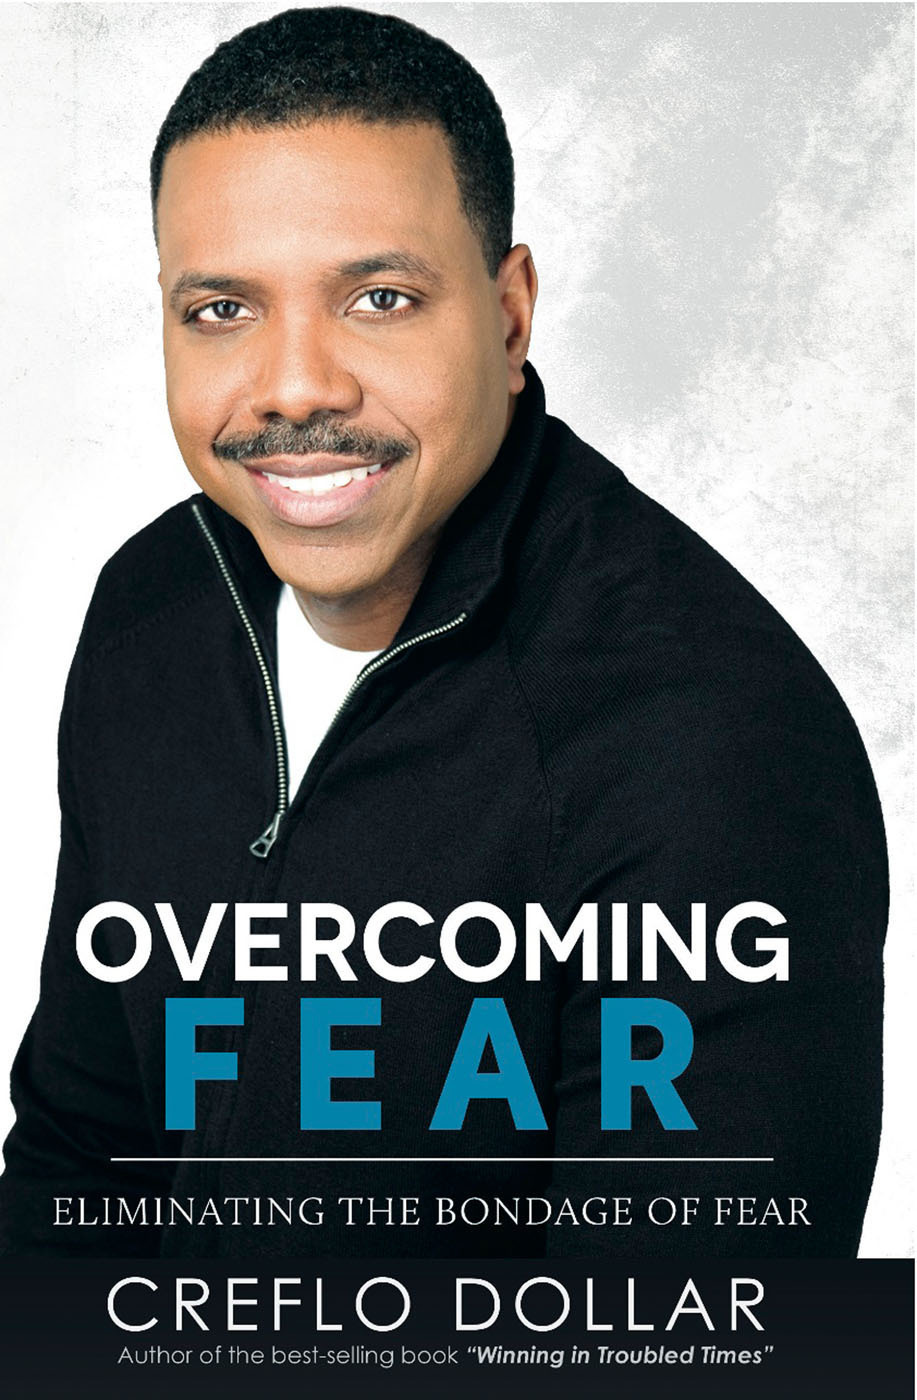 Trying to connect with the majority of people during current times, Dr. Dollar's new book covers the topic of overcoming fears in everyday life and finding peace during the most frightful times in one's life. Using his own experiences and stories including his account of having cancer, Dr. Dollar hopes his testimony will reach out to others in dire need.